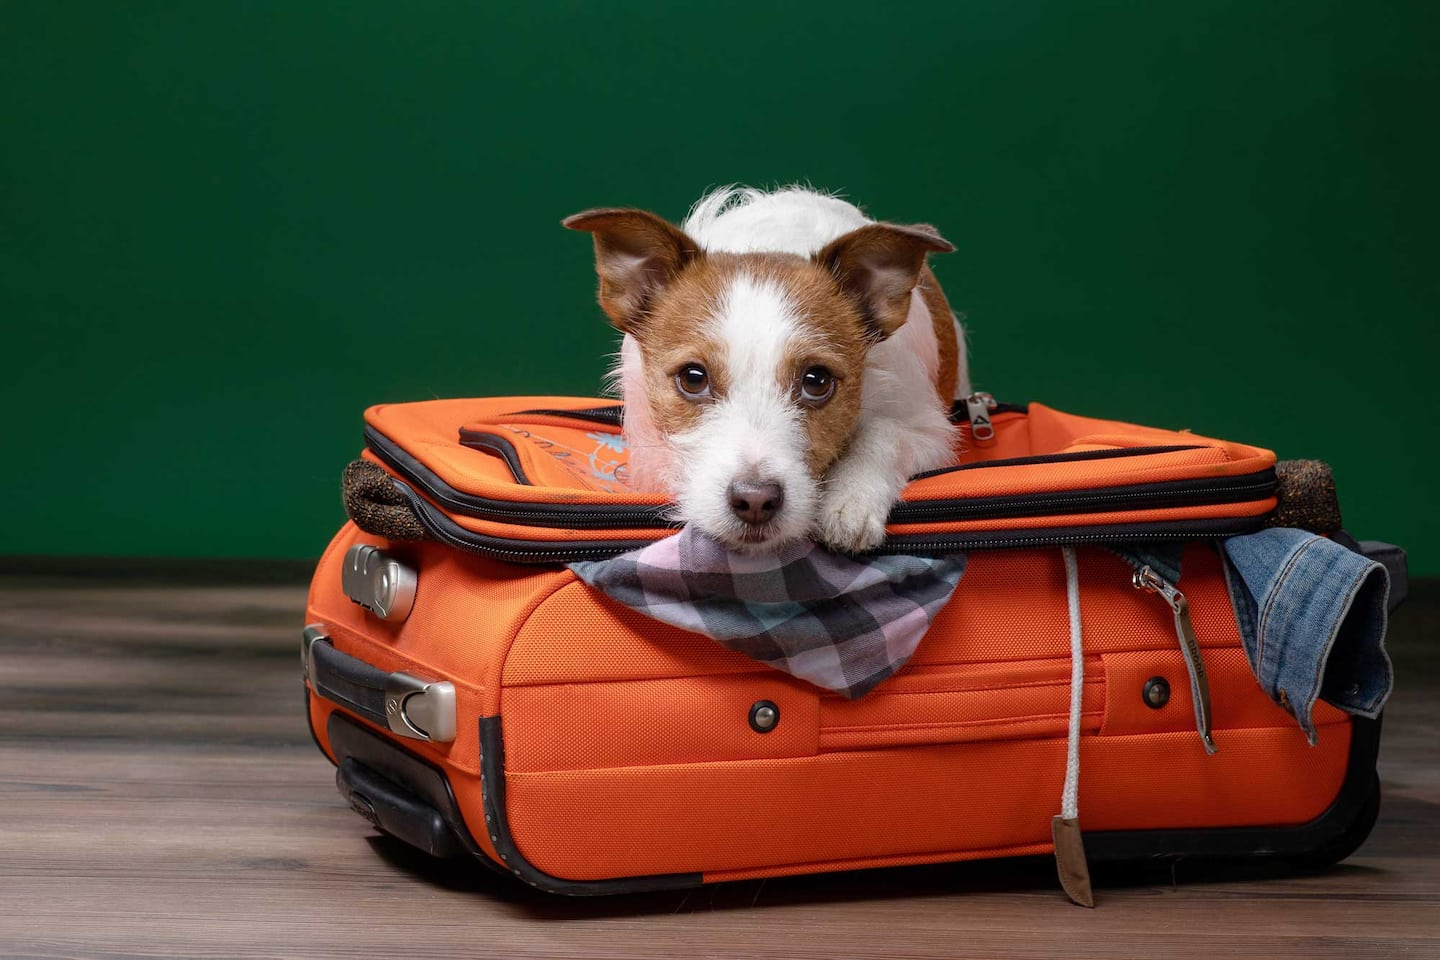 Importing dogs: a risk for everyone